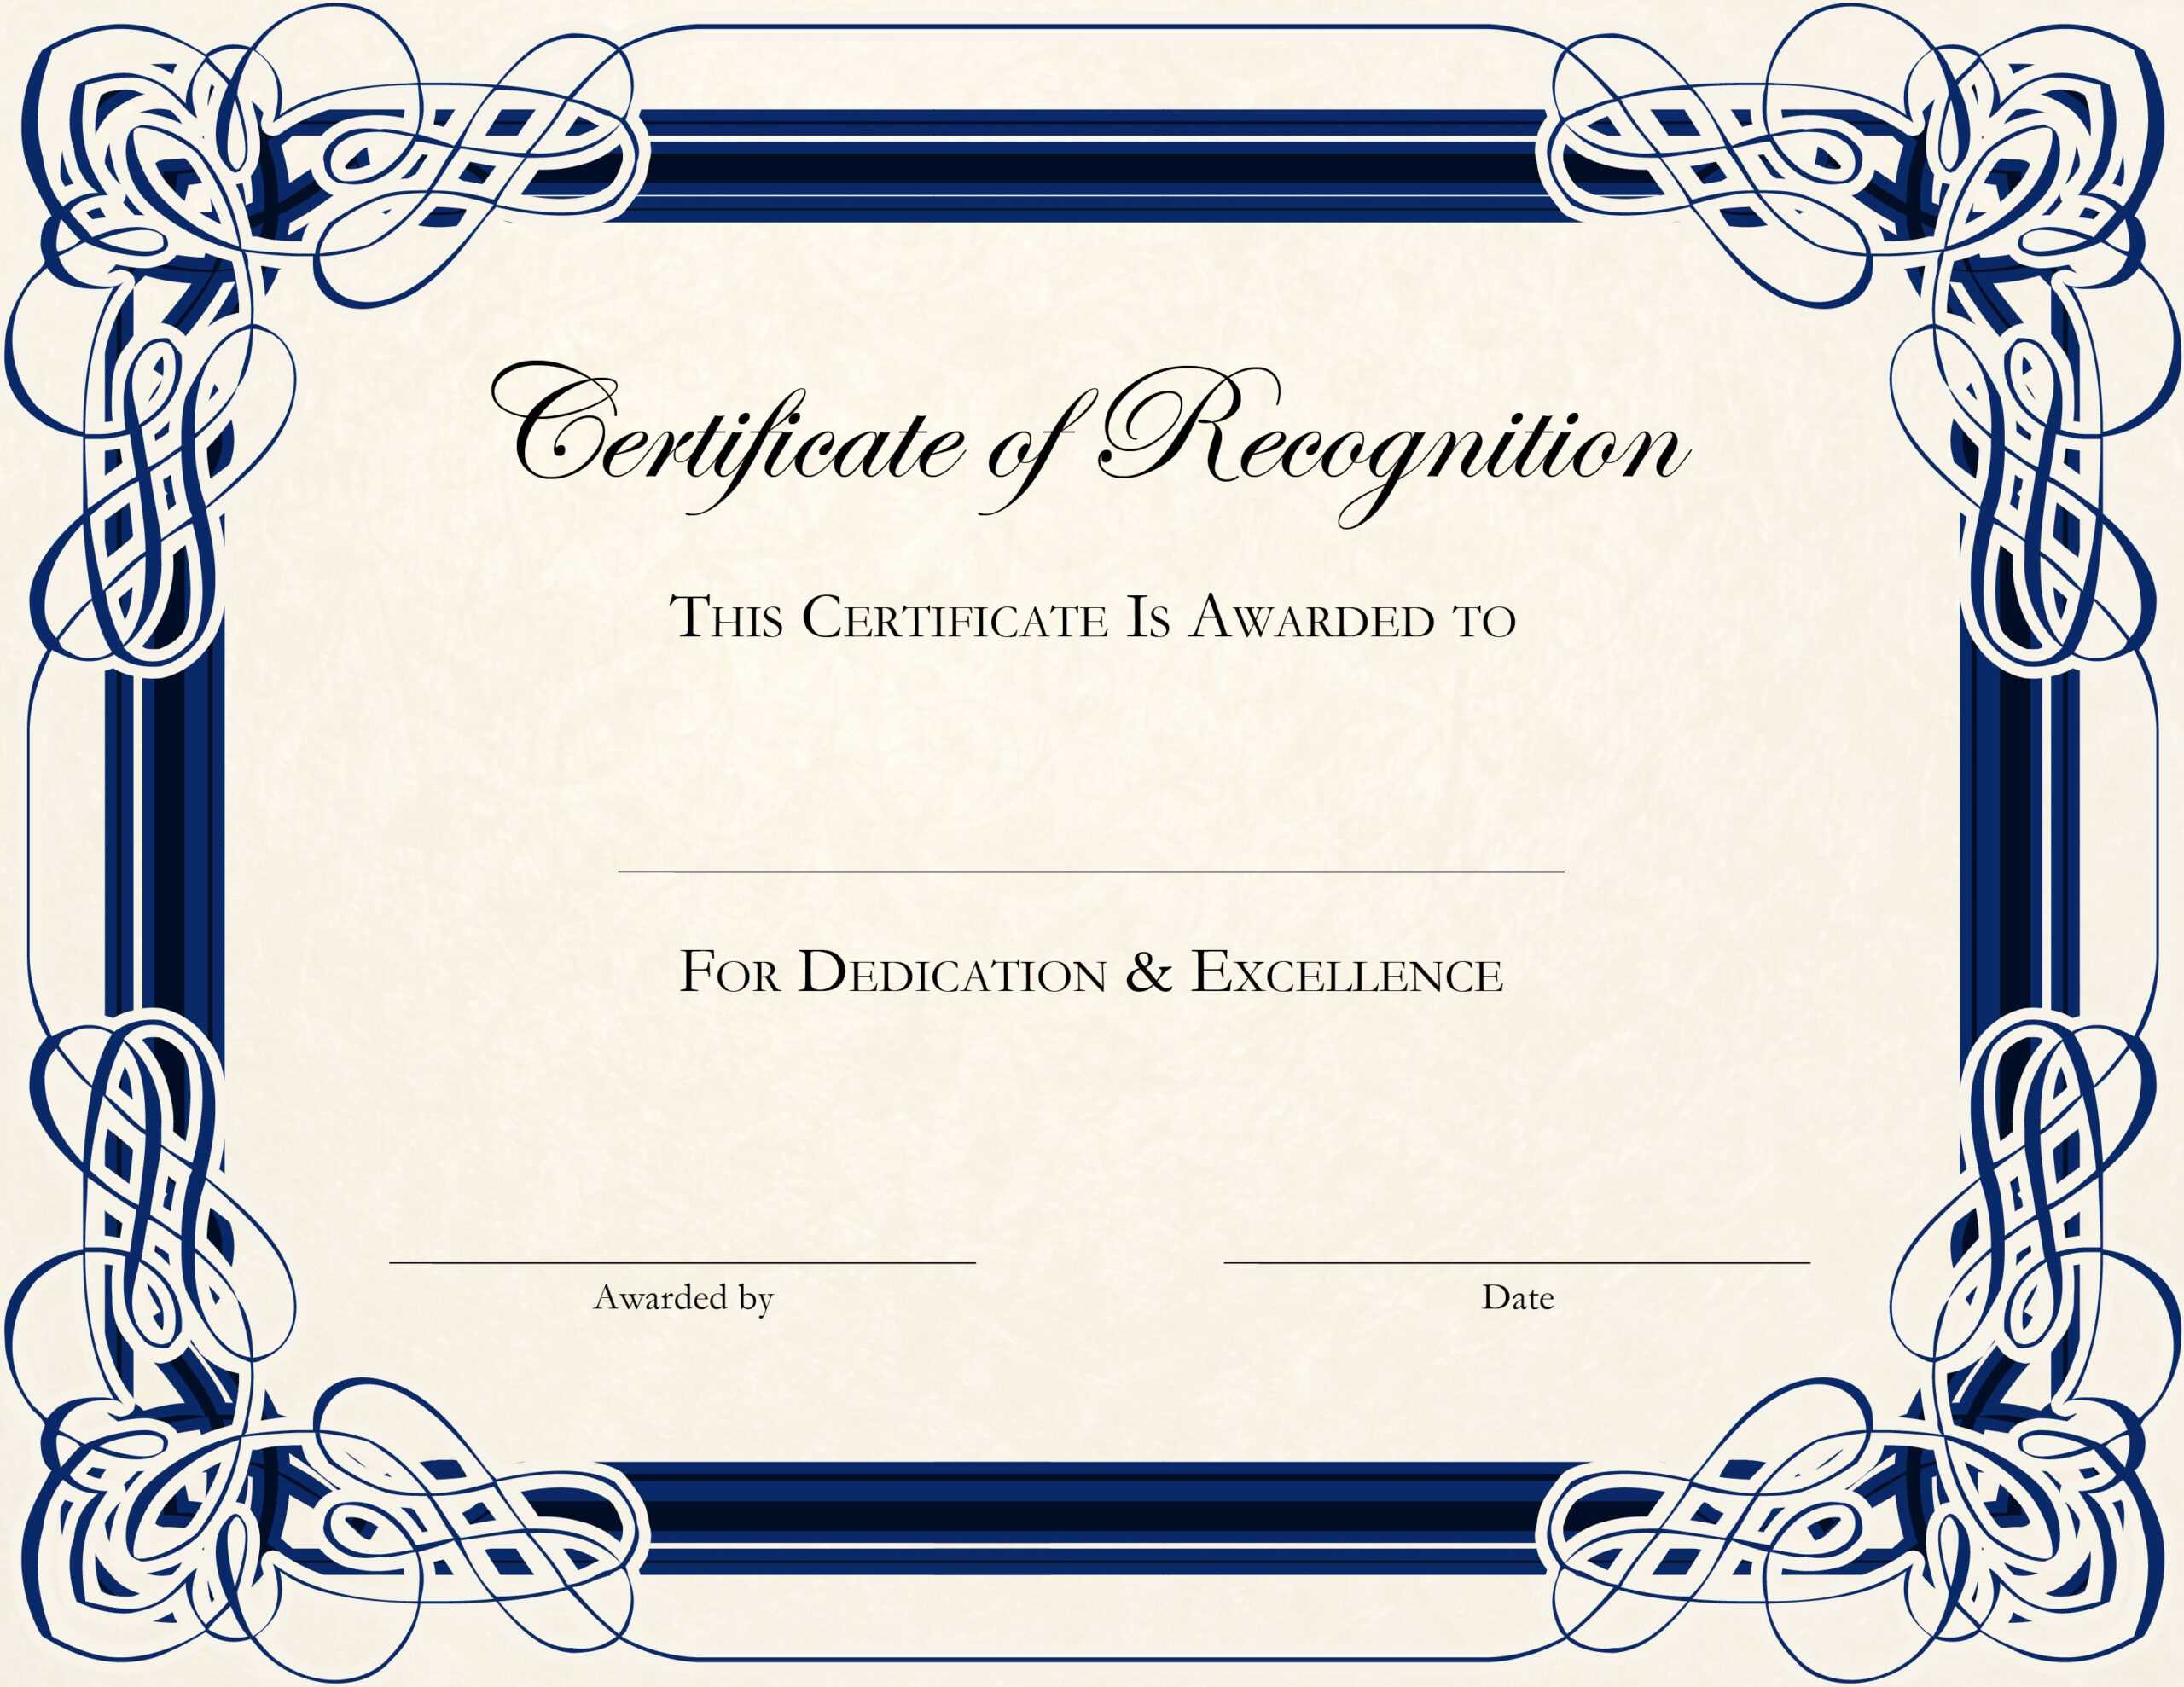 Certificate Template Designs Recognition Docs | Certificate Throughout Free Printable Certificate Of Achievement Template